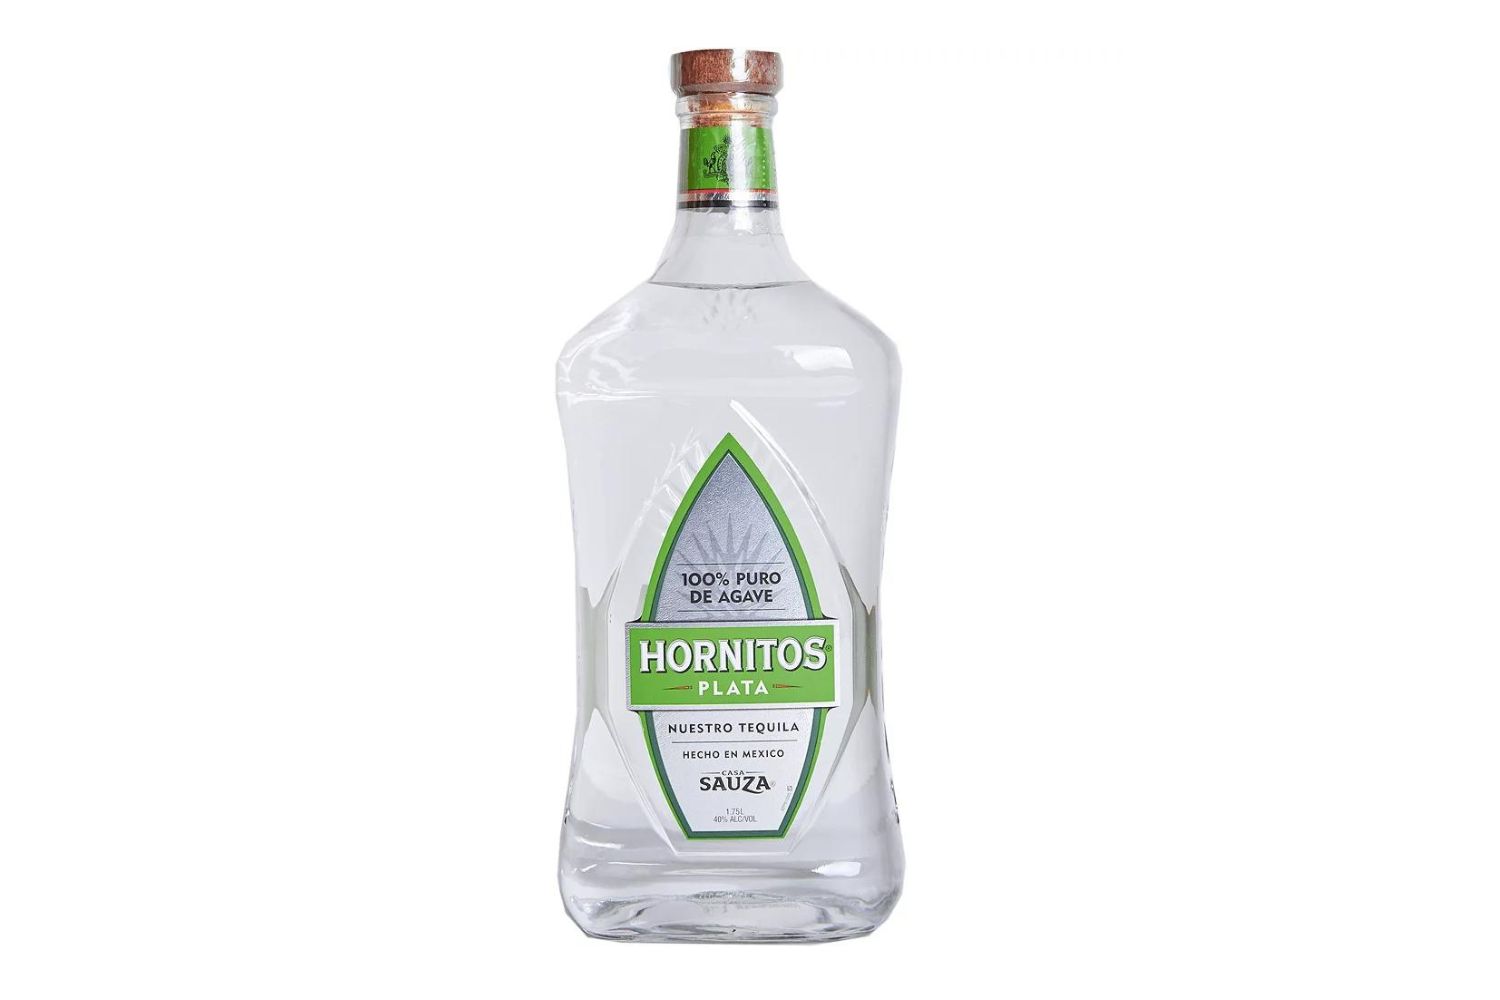 13-fascinating-facts-about-hornitos